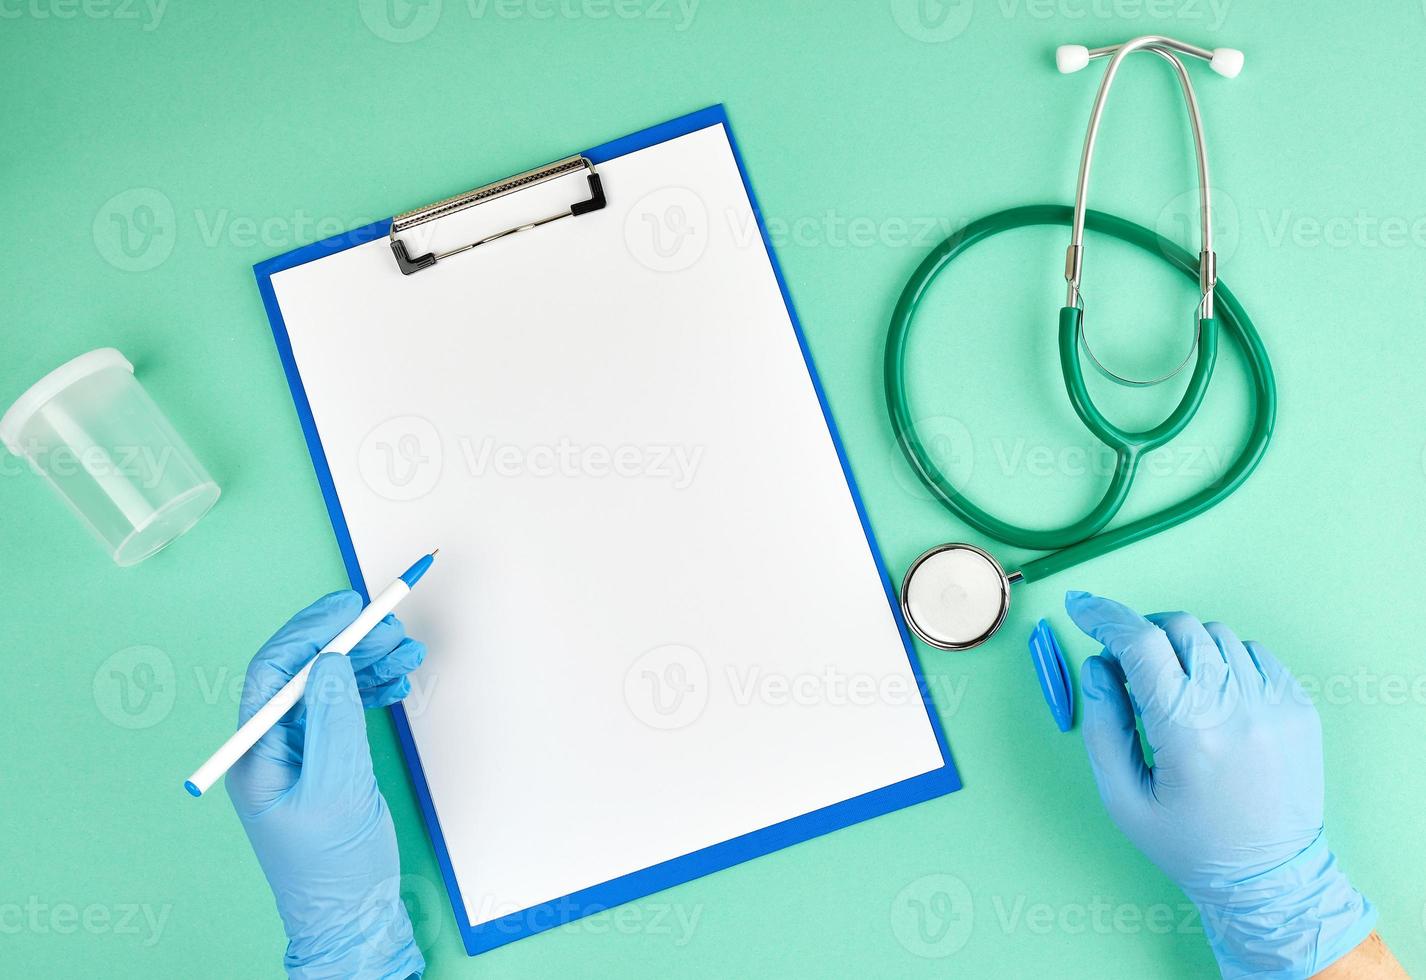 female hand in blue sterile gloves and medical stethoscope photo